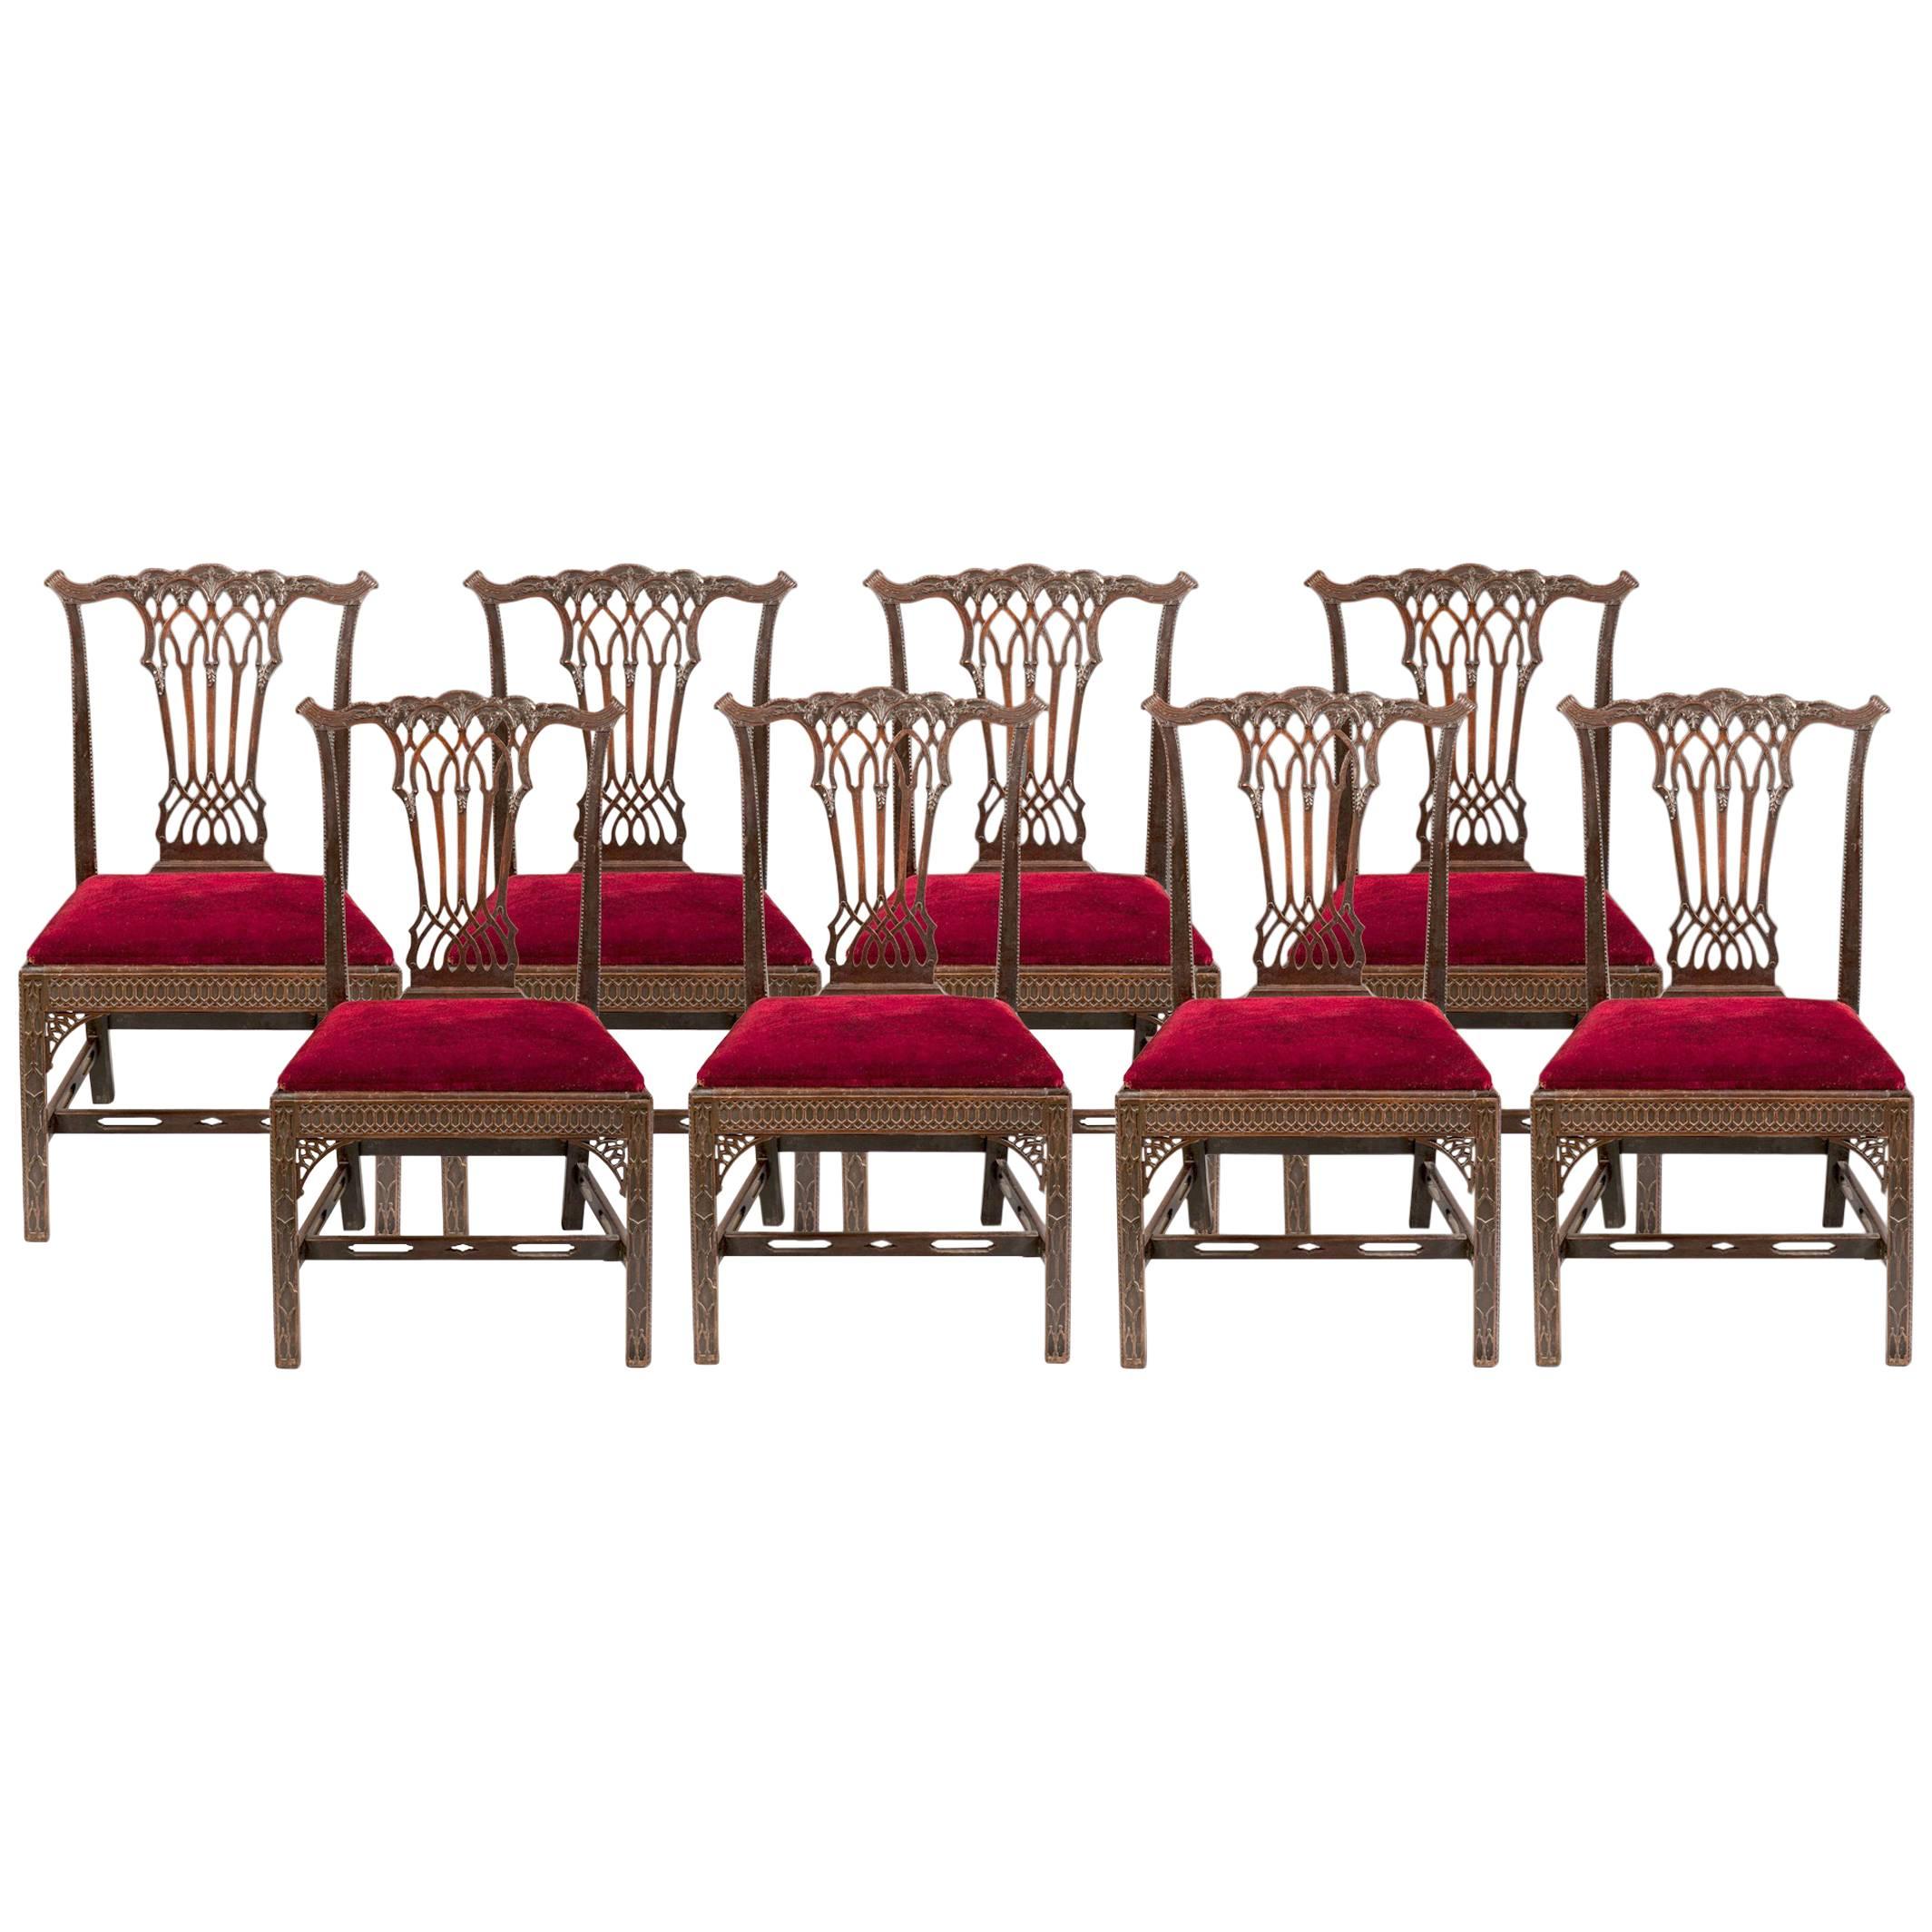 Set of 8 English Dining Chairs in the Georgian Gothick Manner 